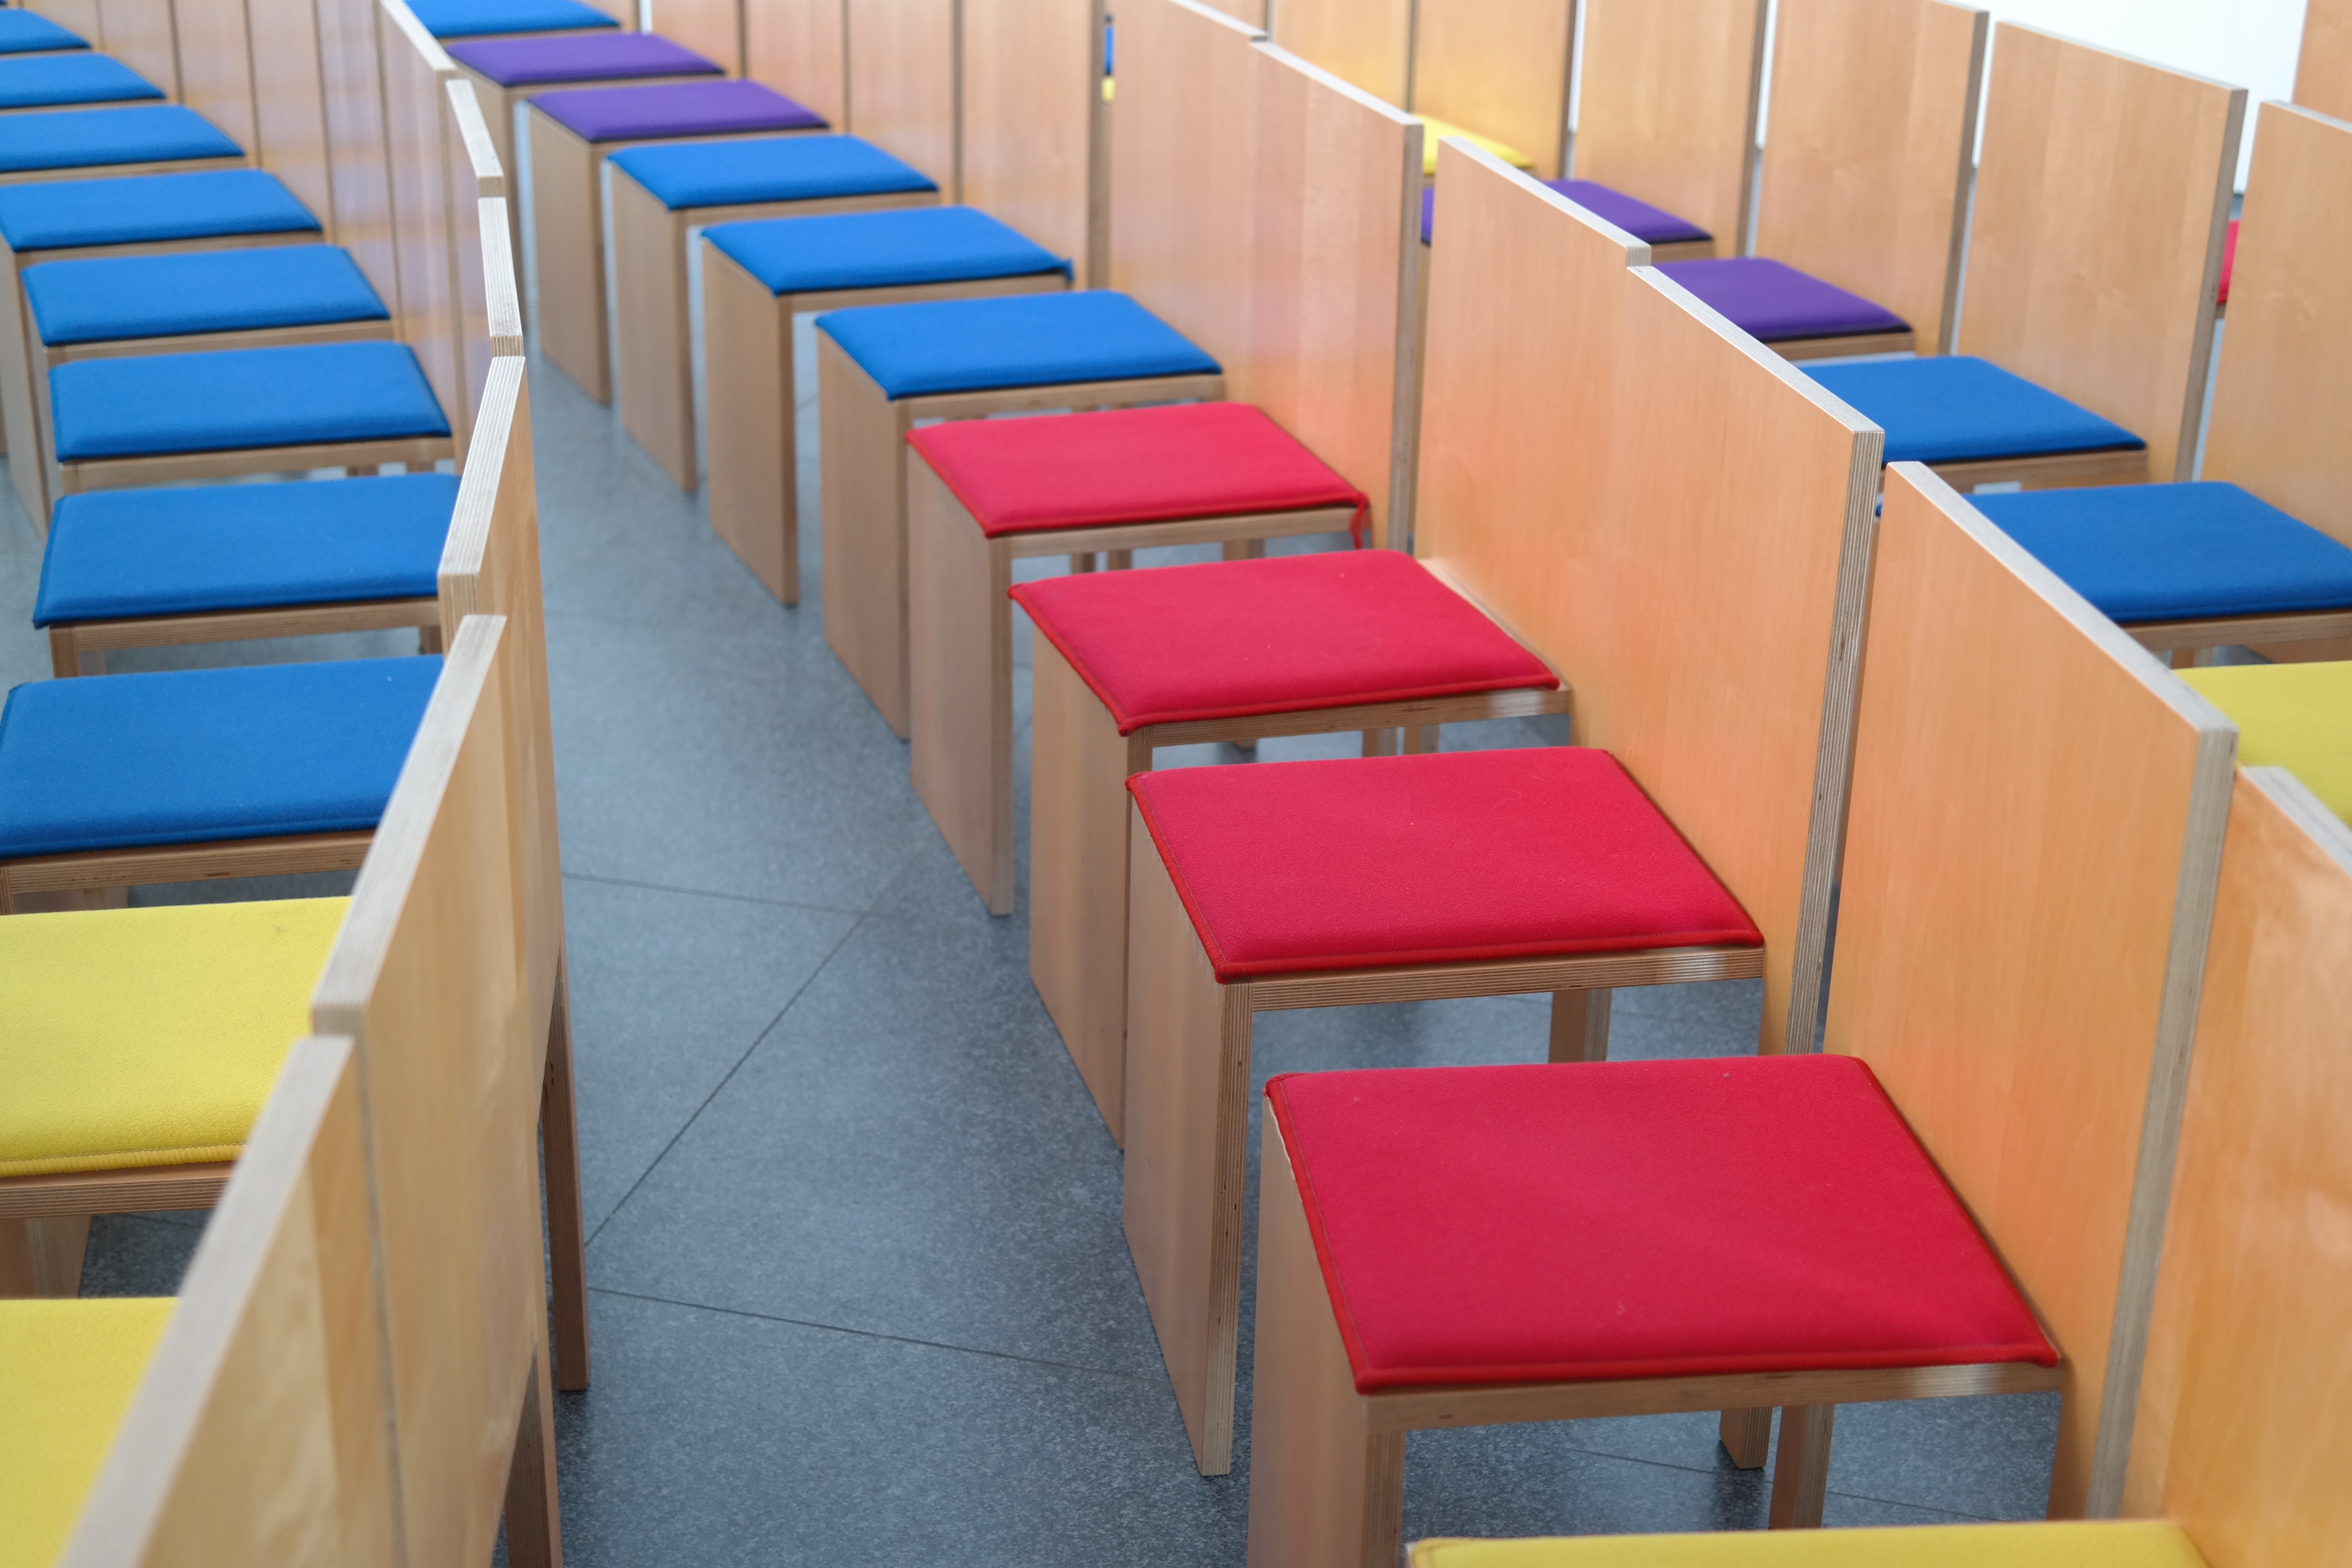 Seat, Sit, Break, Chairs, Red, Colorful, in a row, education